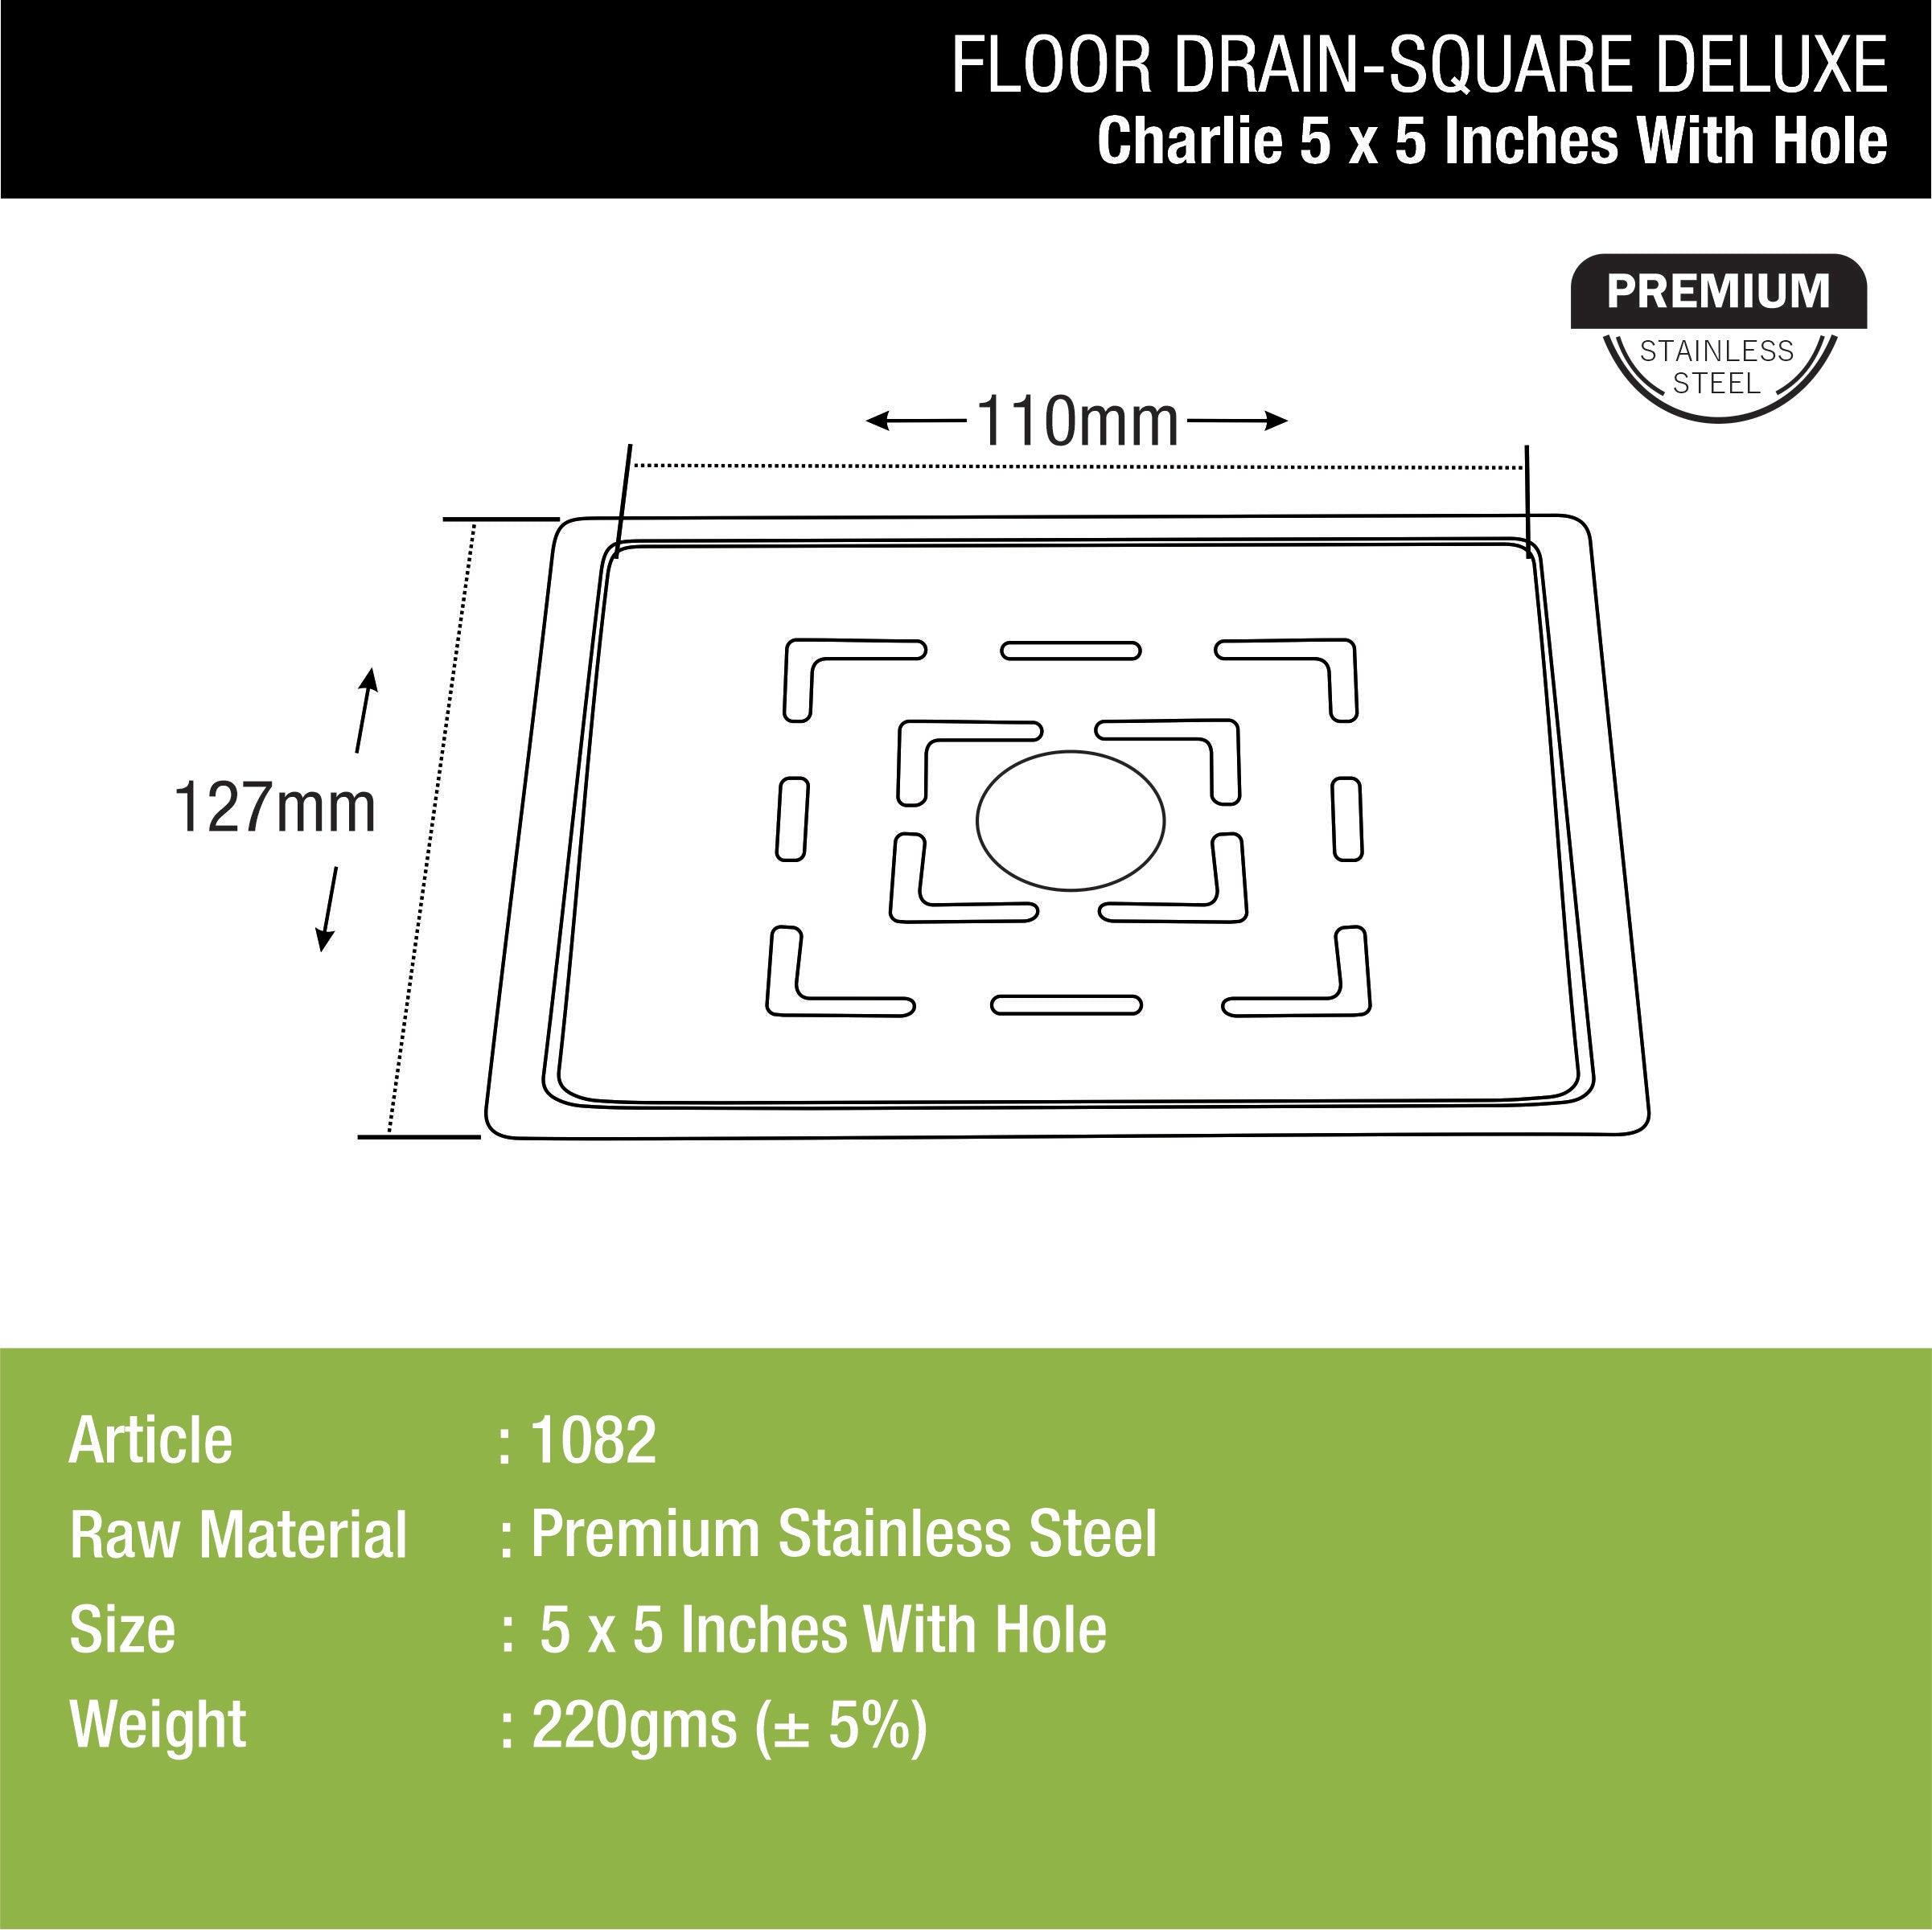 Charlie Deluxe Square Flat Cut Floor Drain (5 x 5 Inches) with Hole dimensions and sizes